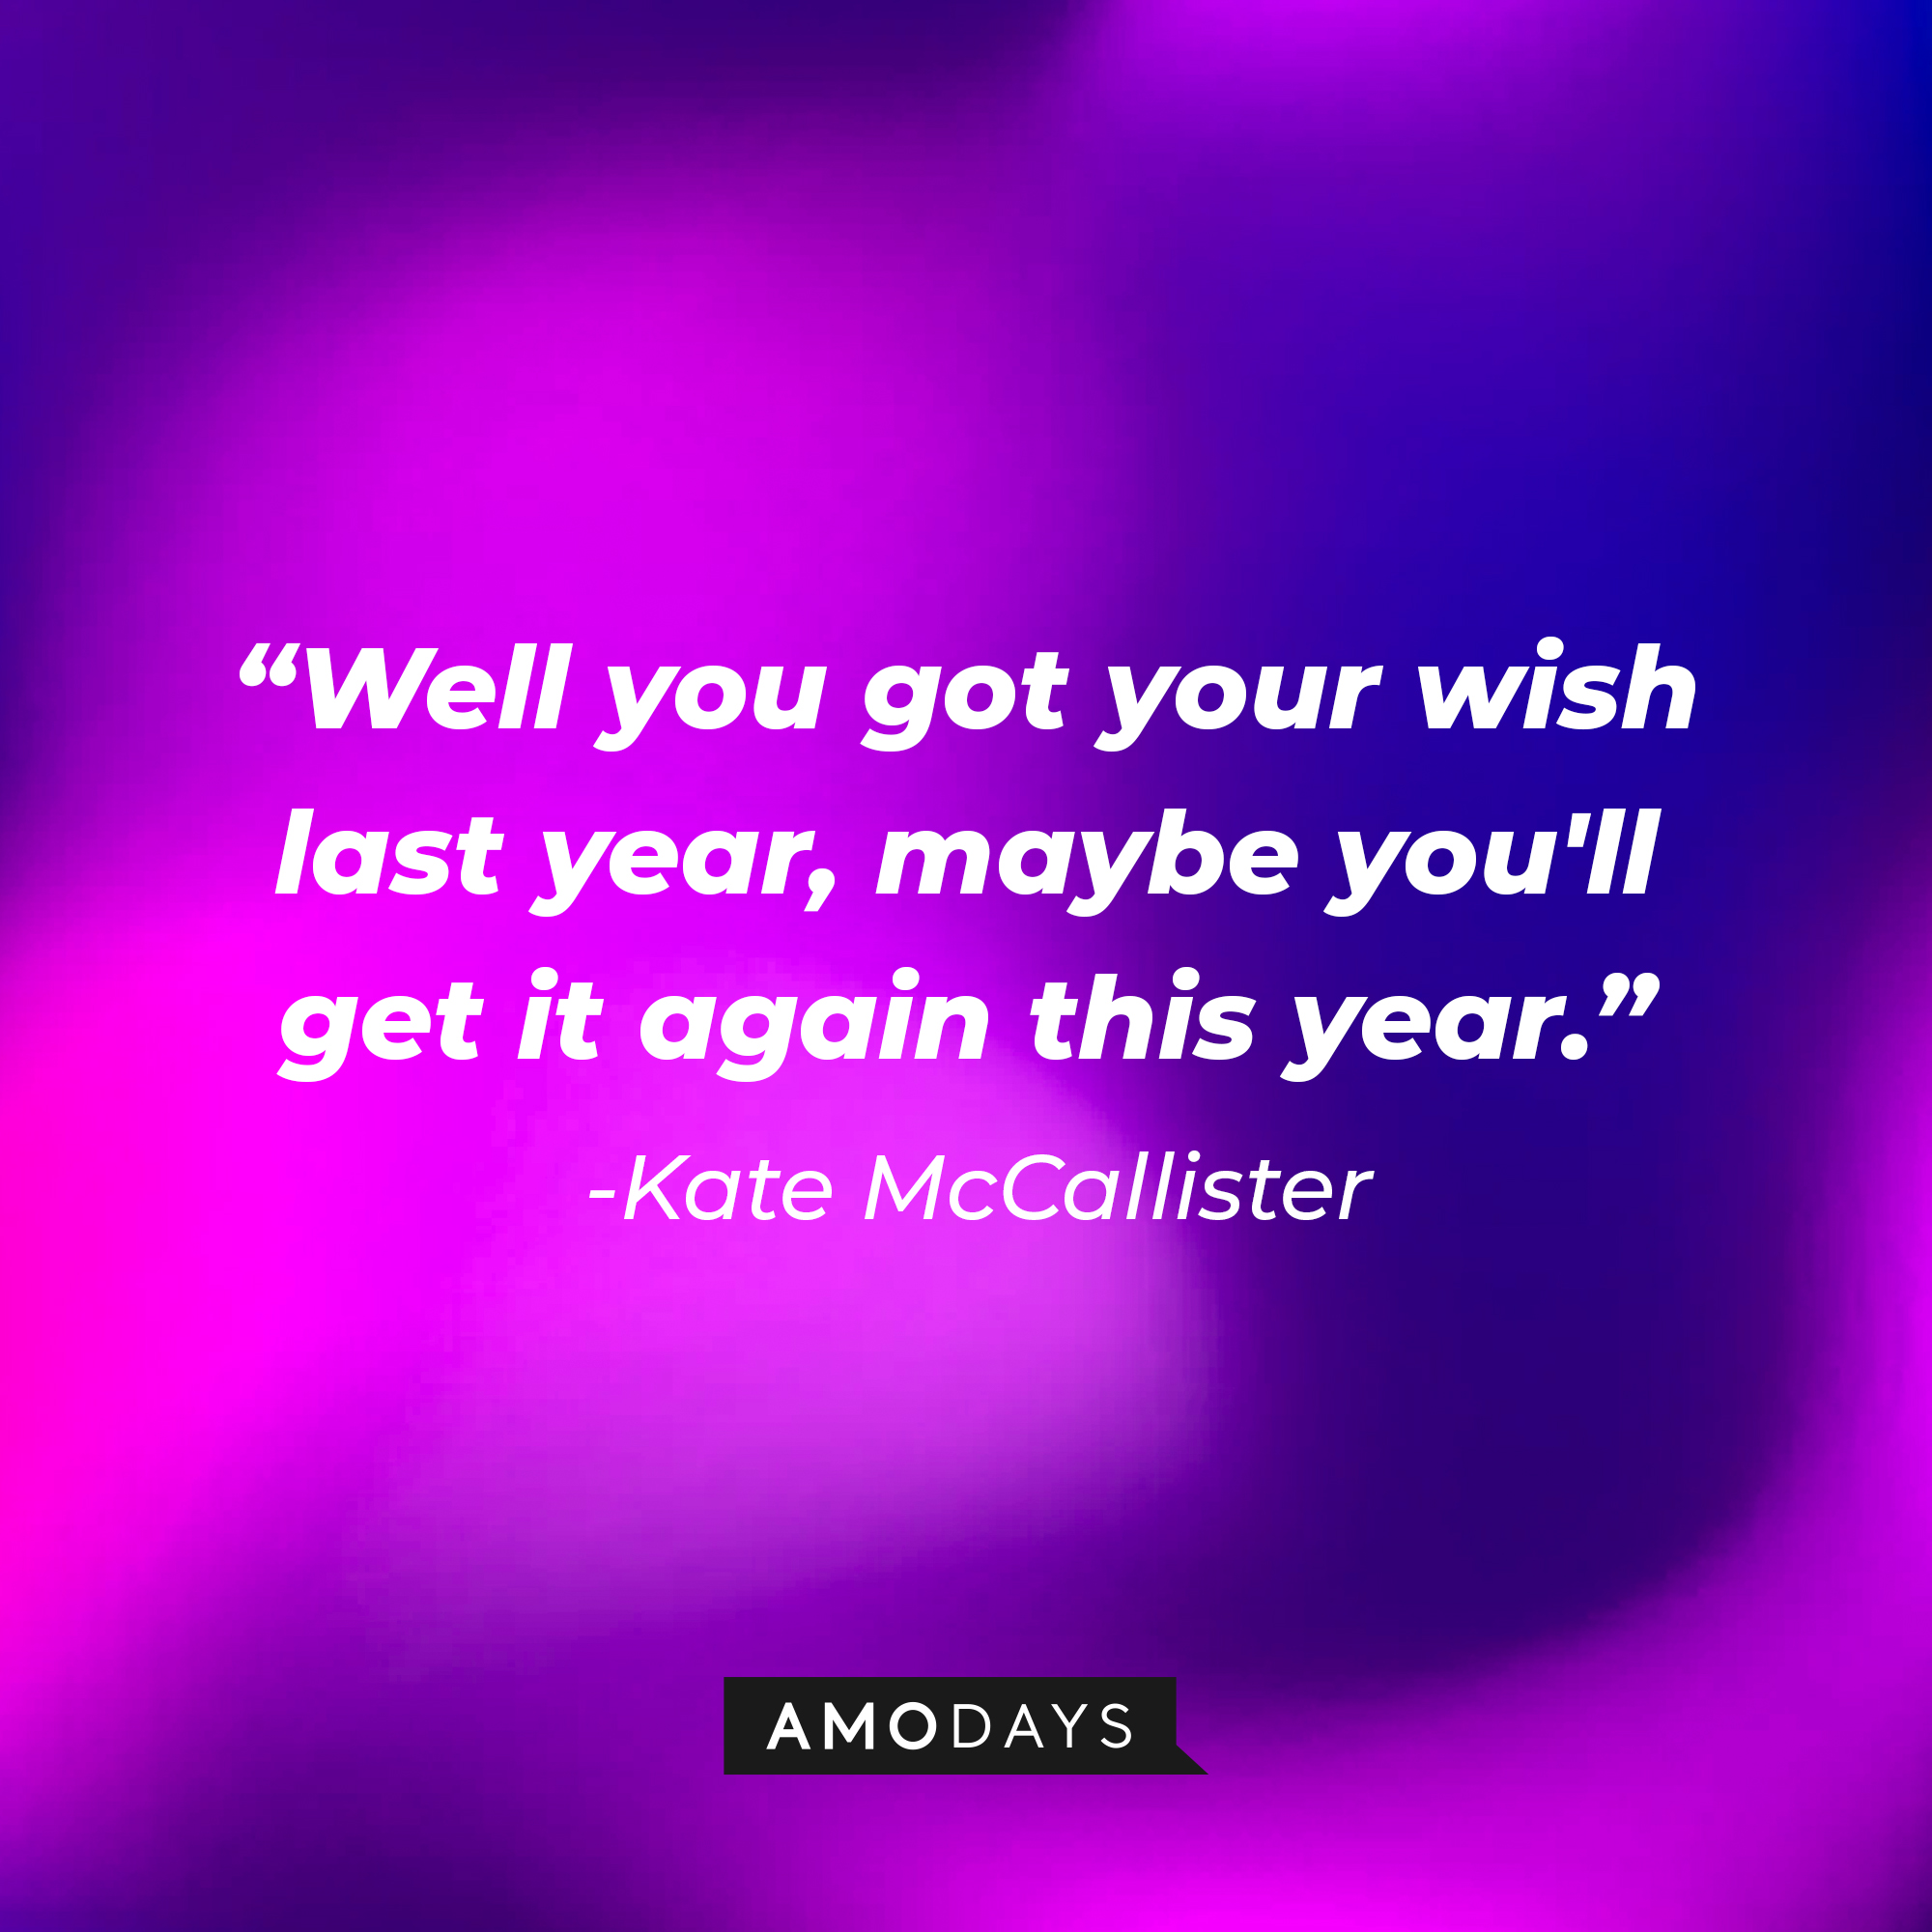 Kate McCallister's quote: "Well you got your wish last year, maybe you'll get it again this year." | Source: AmoDays